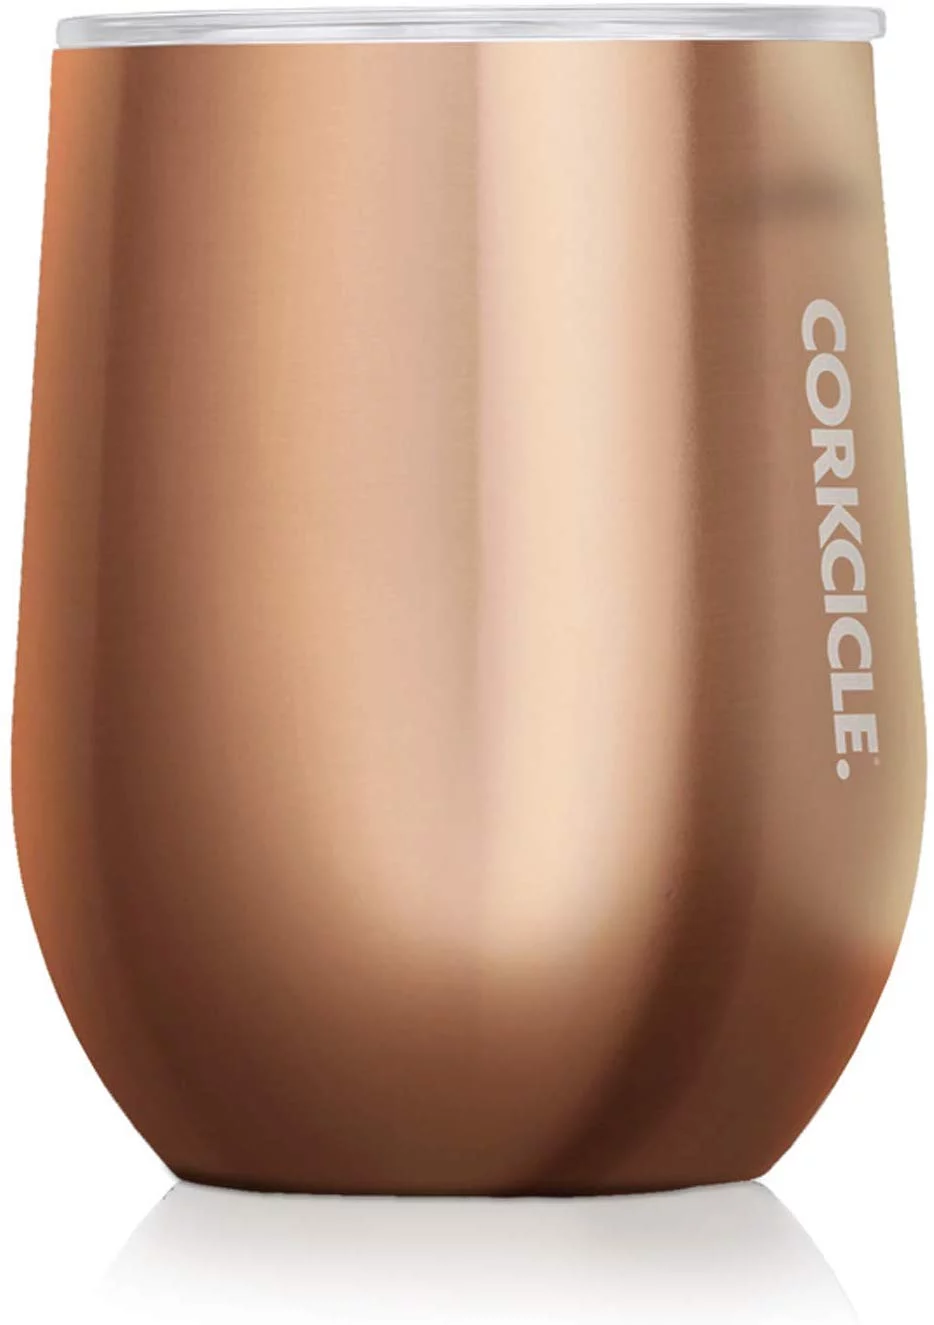 Best Gifts For Hairdressers 2022: Corkcicle Wine Glass 2022